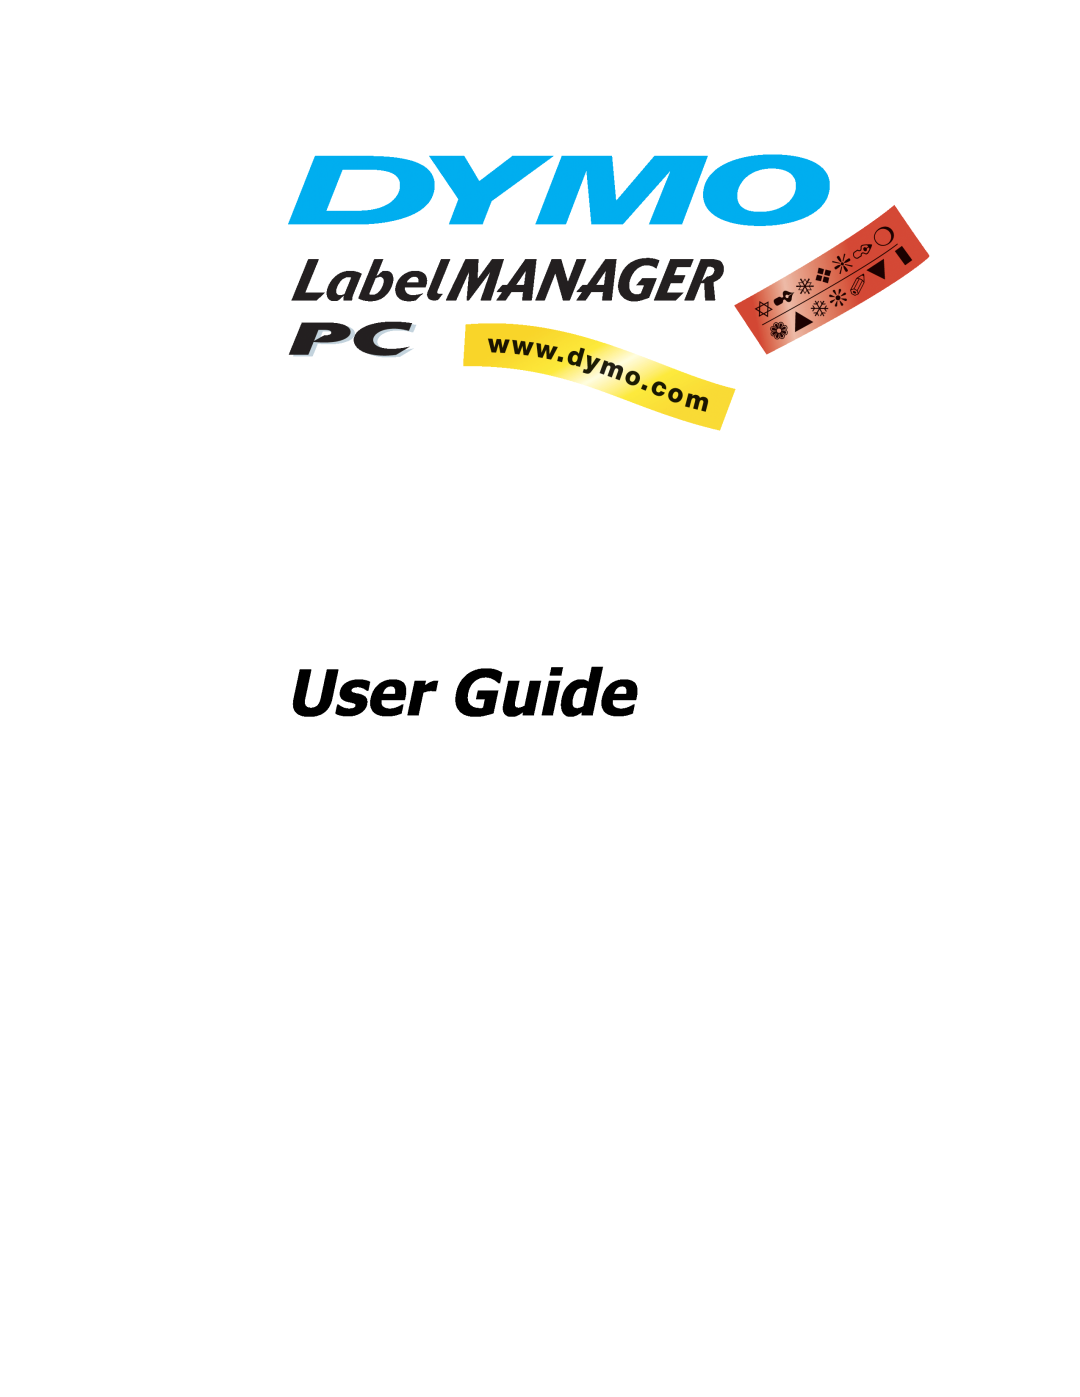 Dymo Label Manager PC manual User Guide 